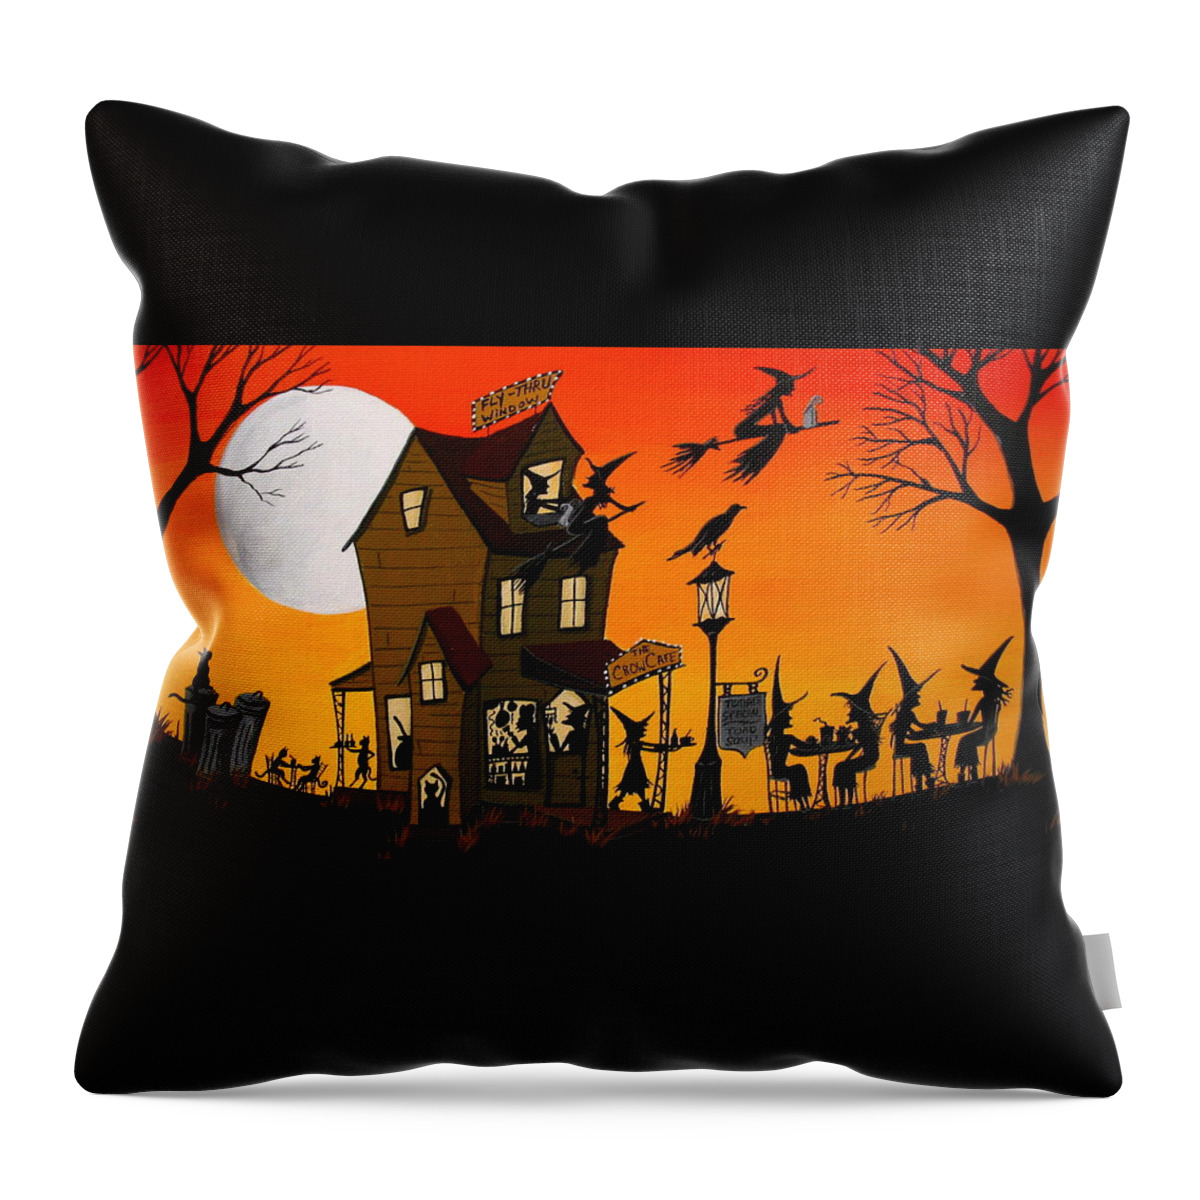 Art Throw Pillow featuring the painting The Crow Cafe - Halloween witch cat folk art by Debbie Criswell